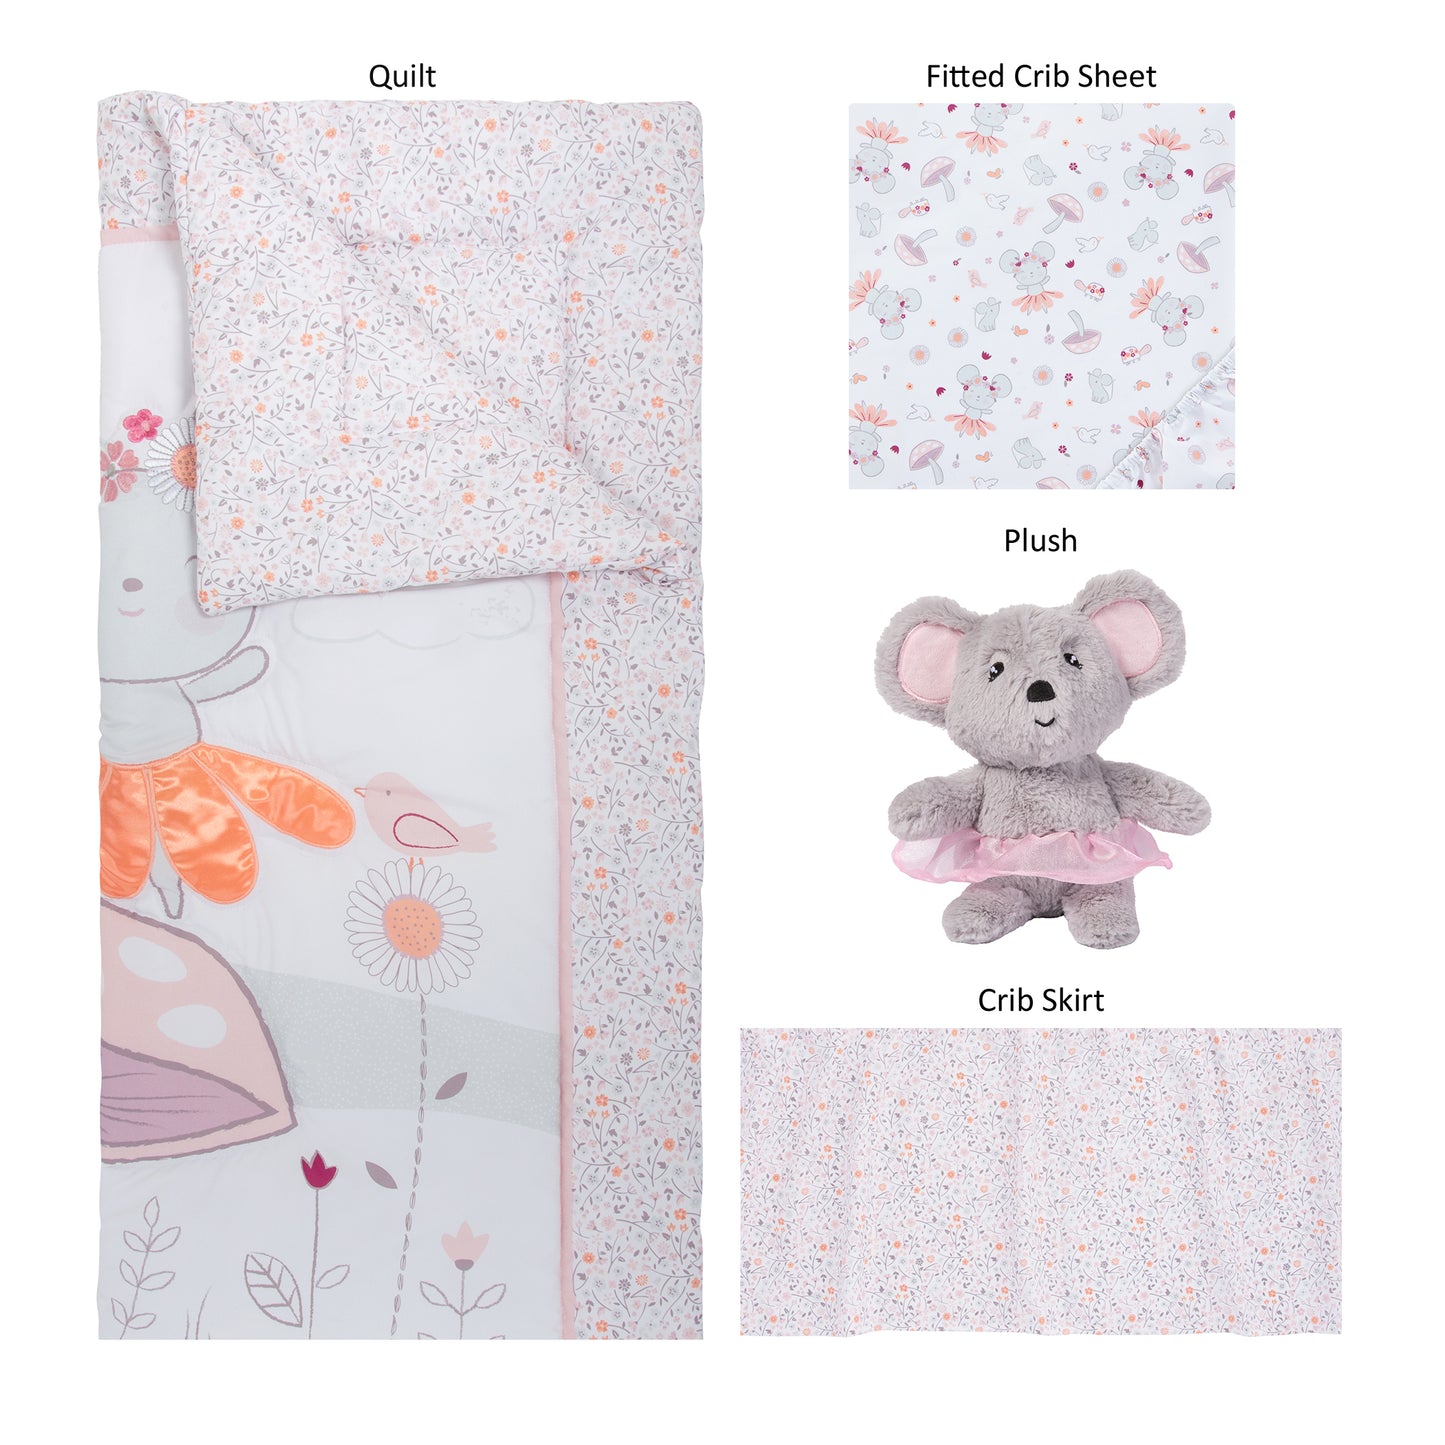  Dancing Mouse 4 Piece Crib Bedding Set by Sammy & Lou®; pieces laid out includes crib quilt, crib sheet, crib skirt and plush toy